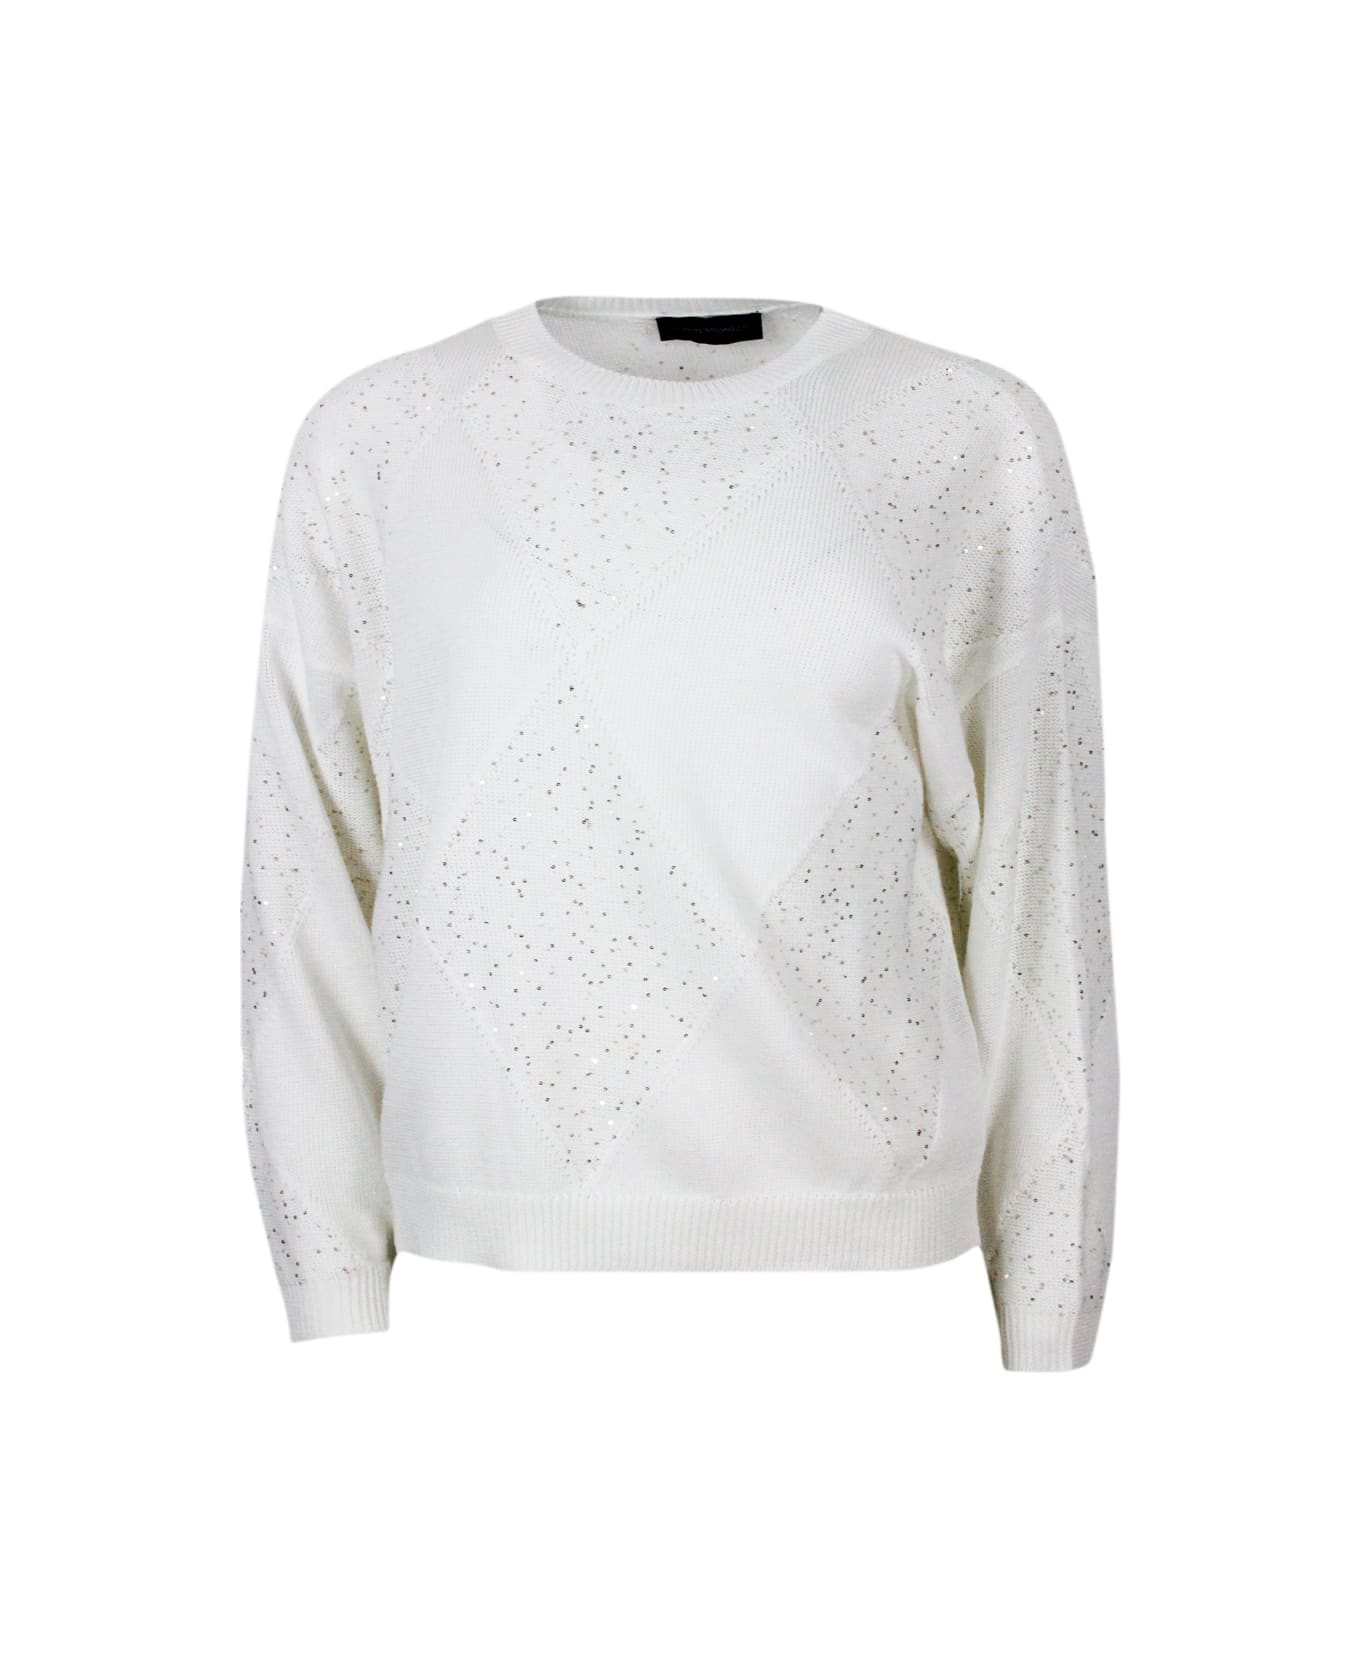 Lorena Antoniazzi Long-sleeved Crew-neck Sweater In Cotton Thread With Diamond Pattern Embellished With Microsequins - White ニットウェア